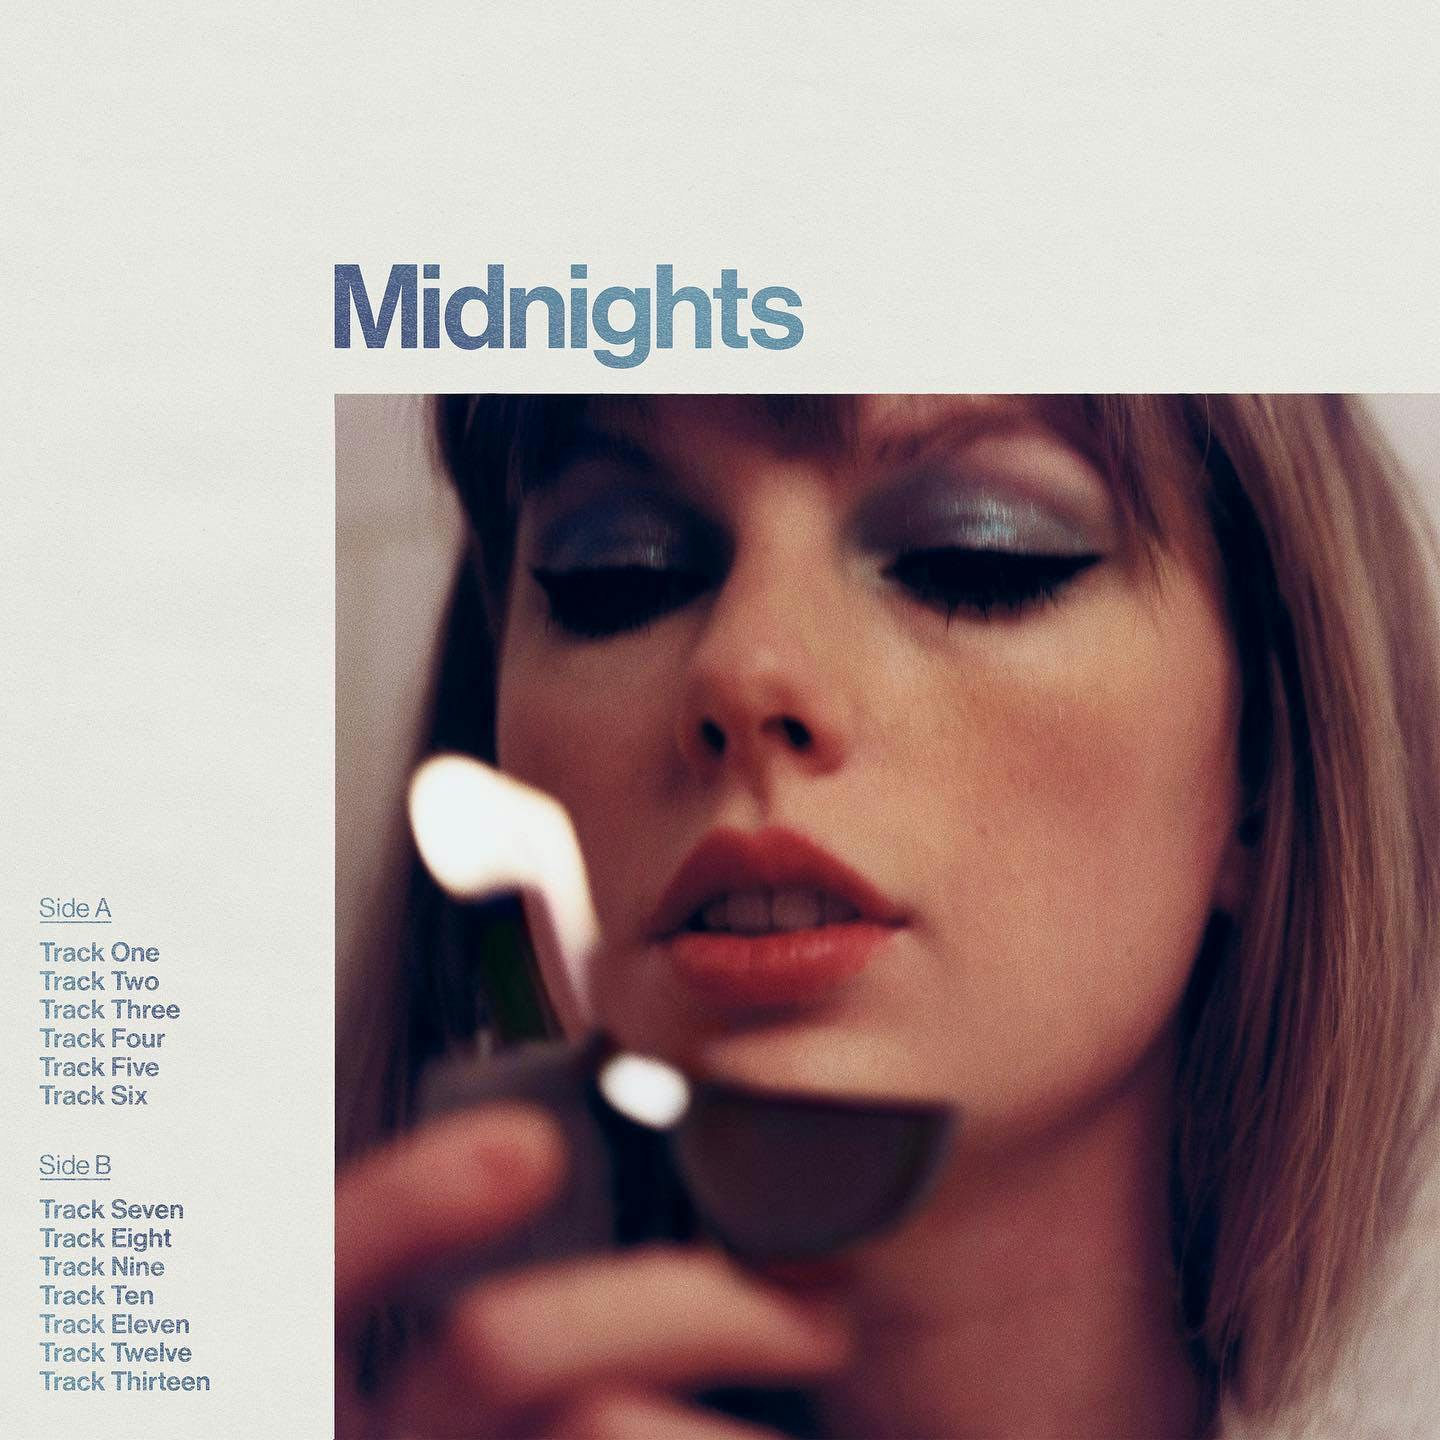 Taylor Swift's Midnights album cover.